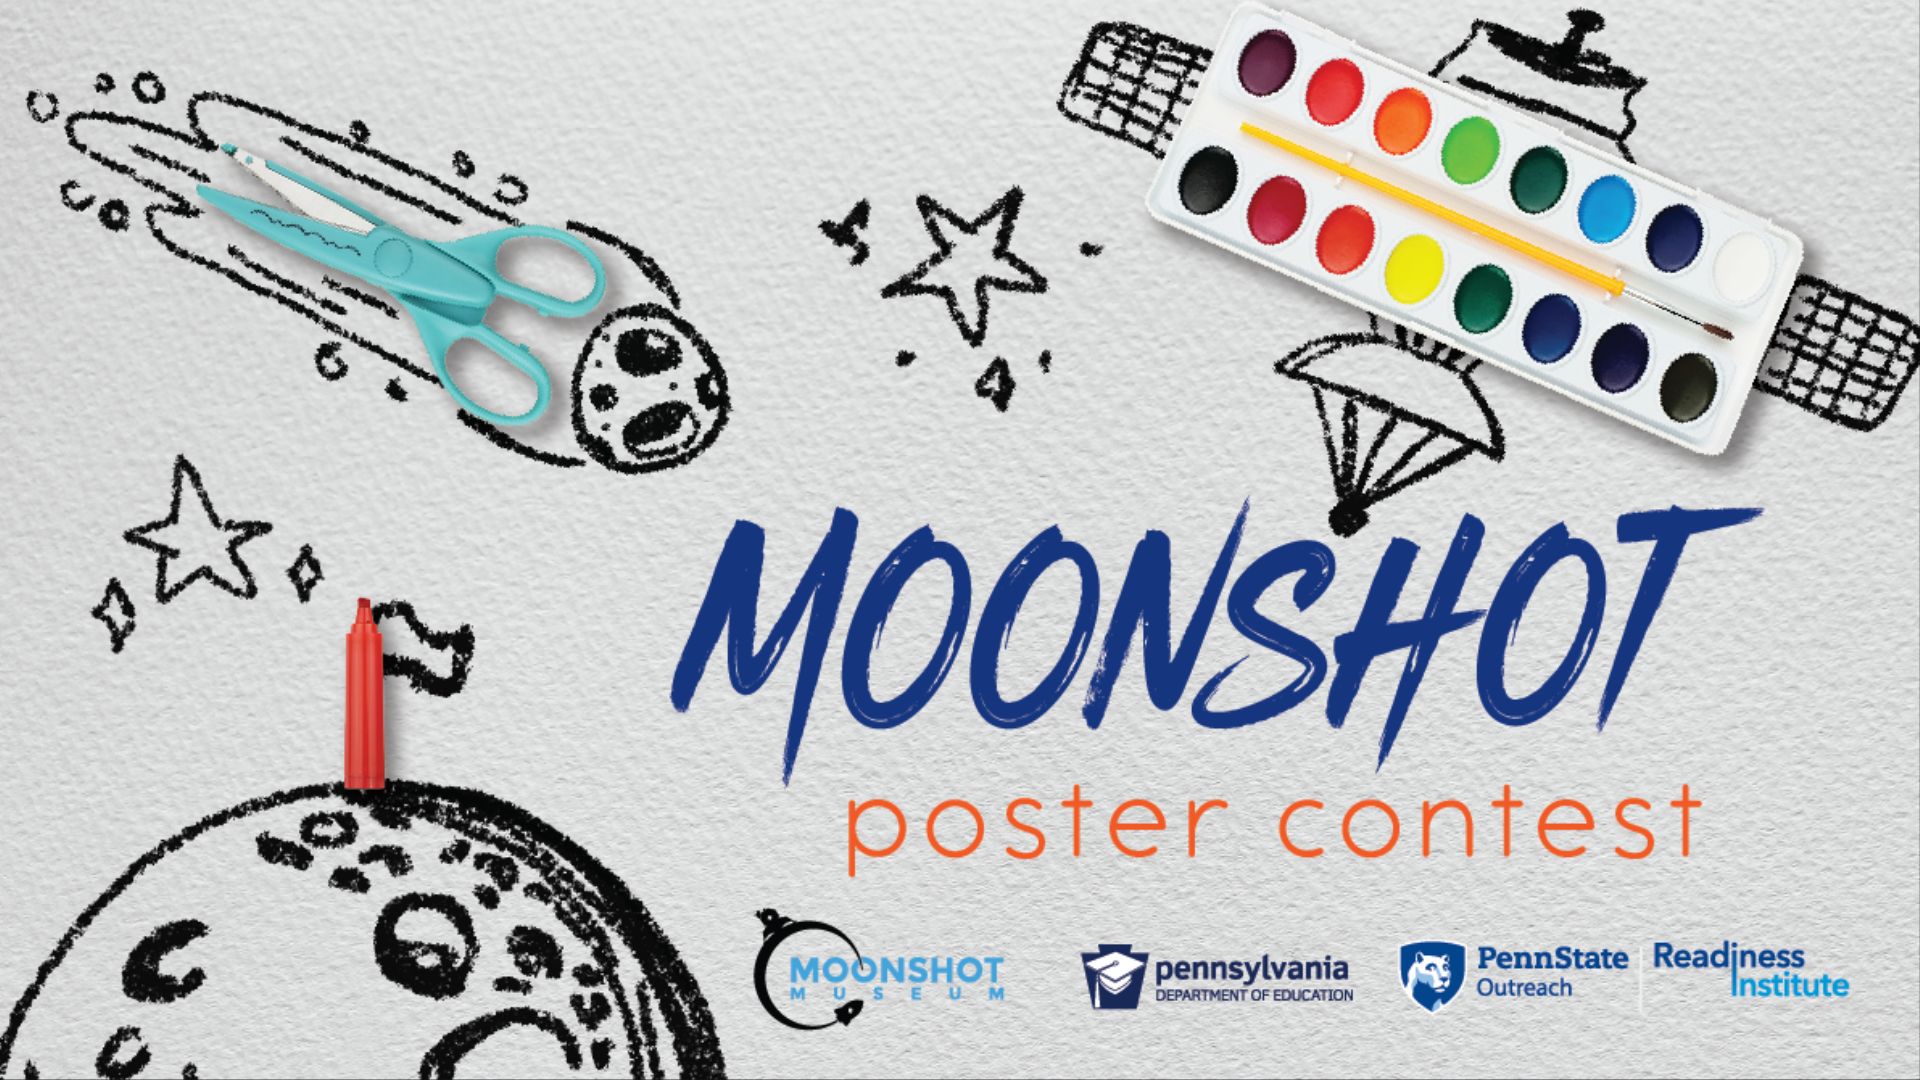 Moonshot poster contest